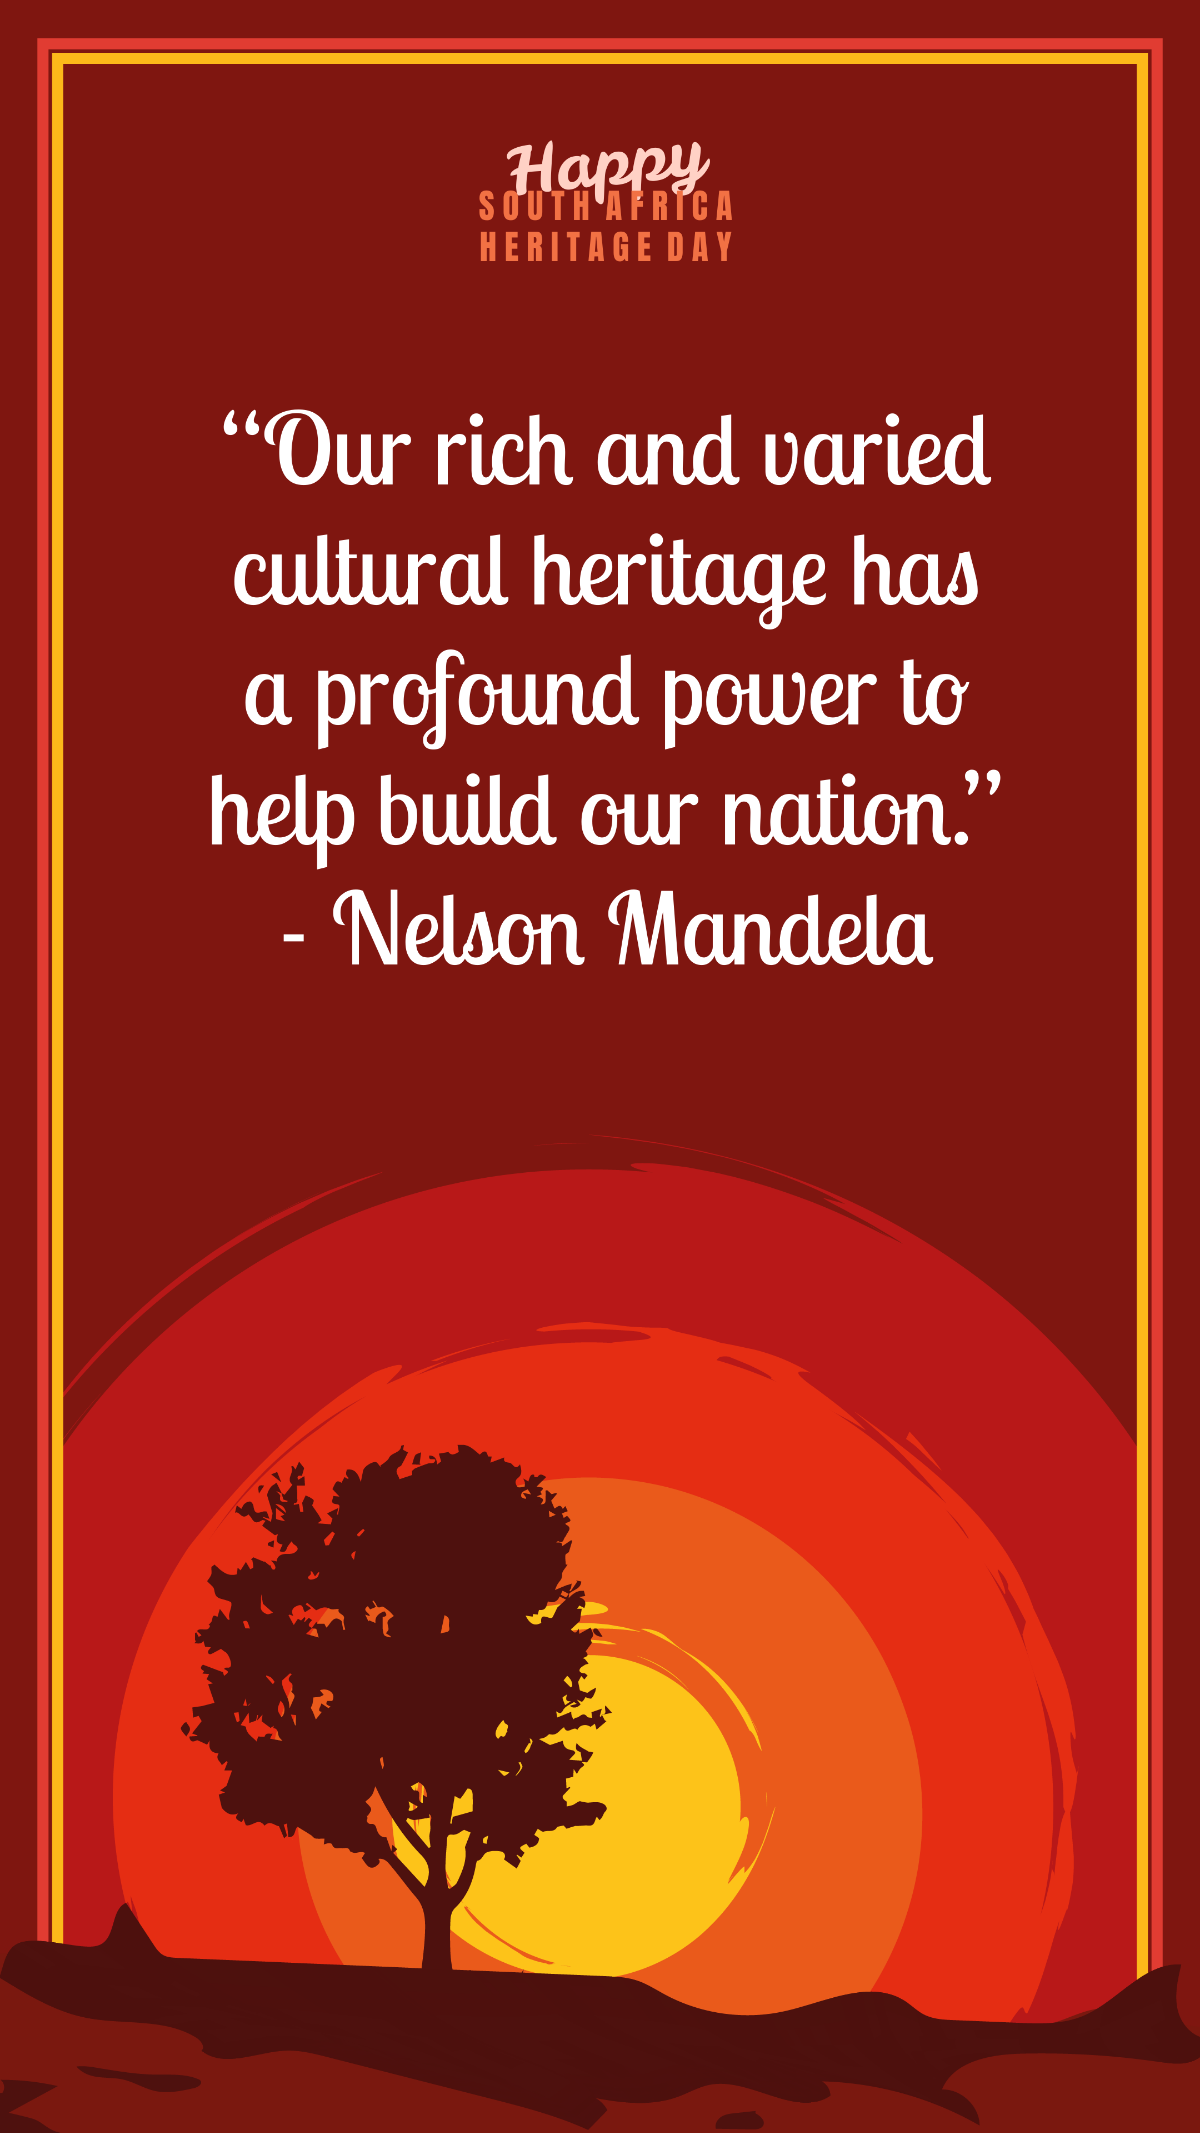 South Africa Heritage Day Quote Template